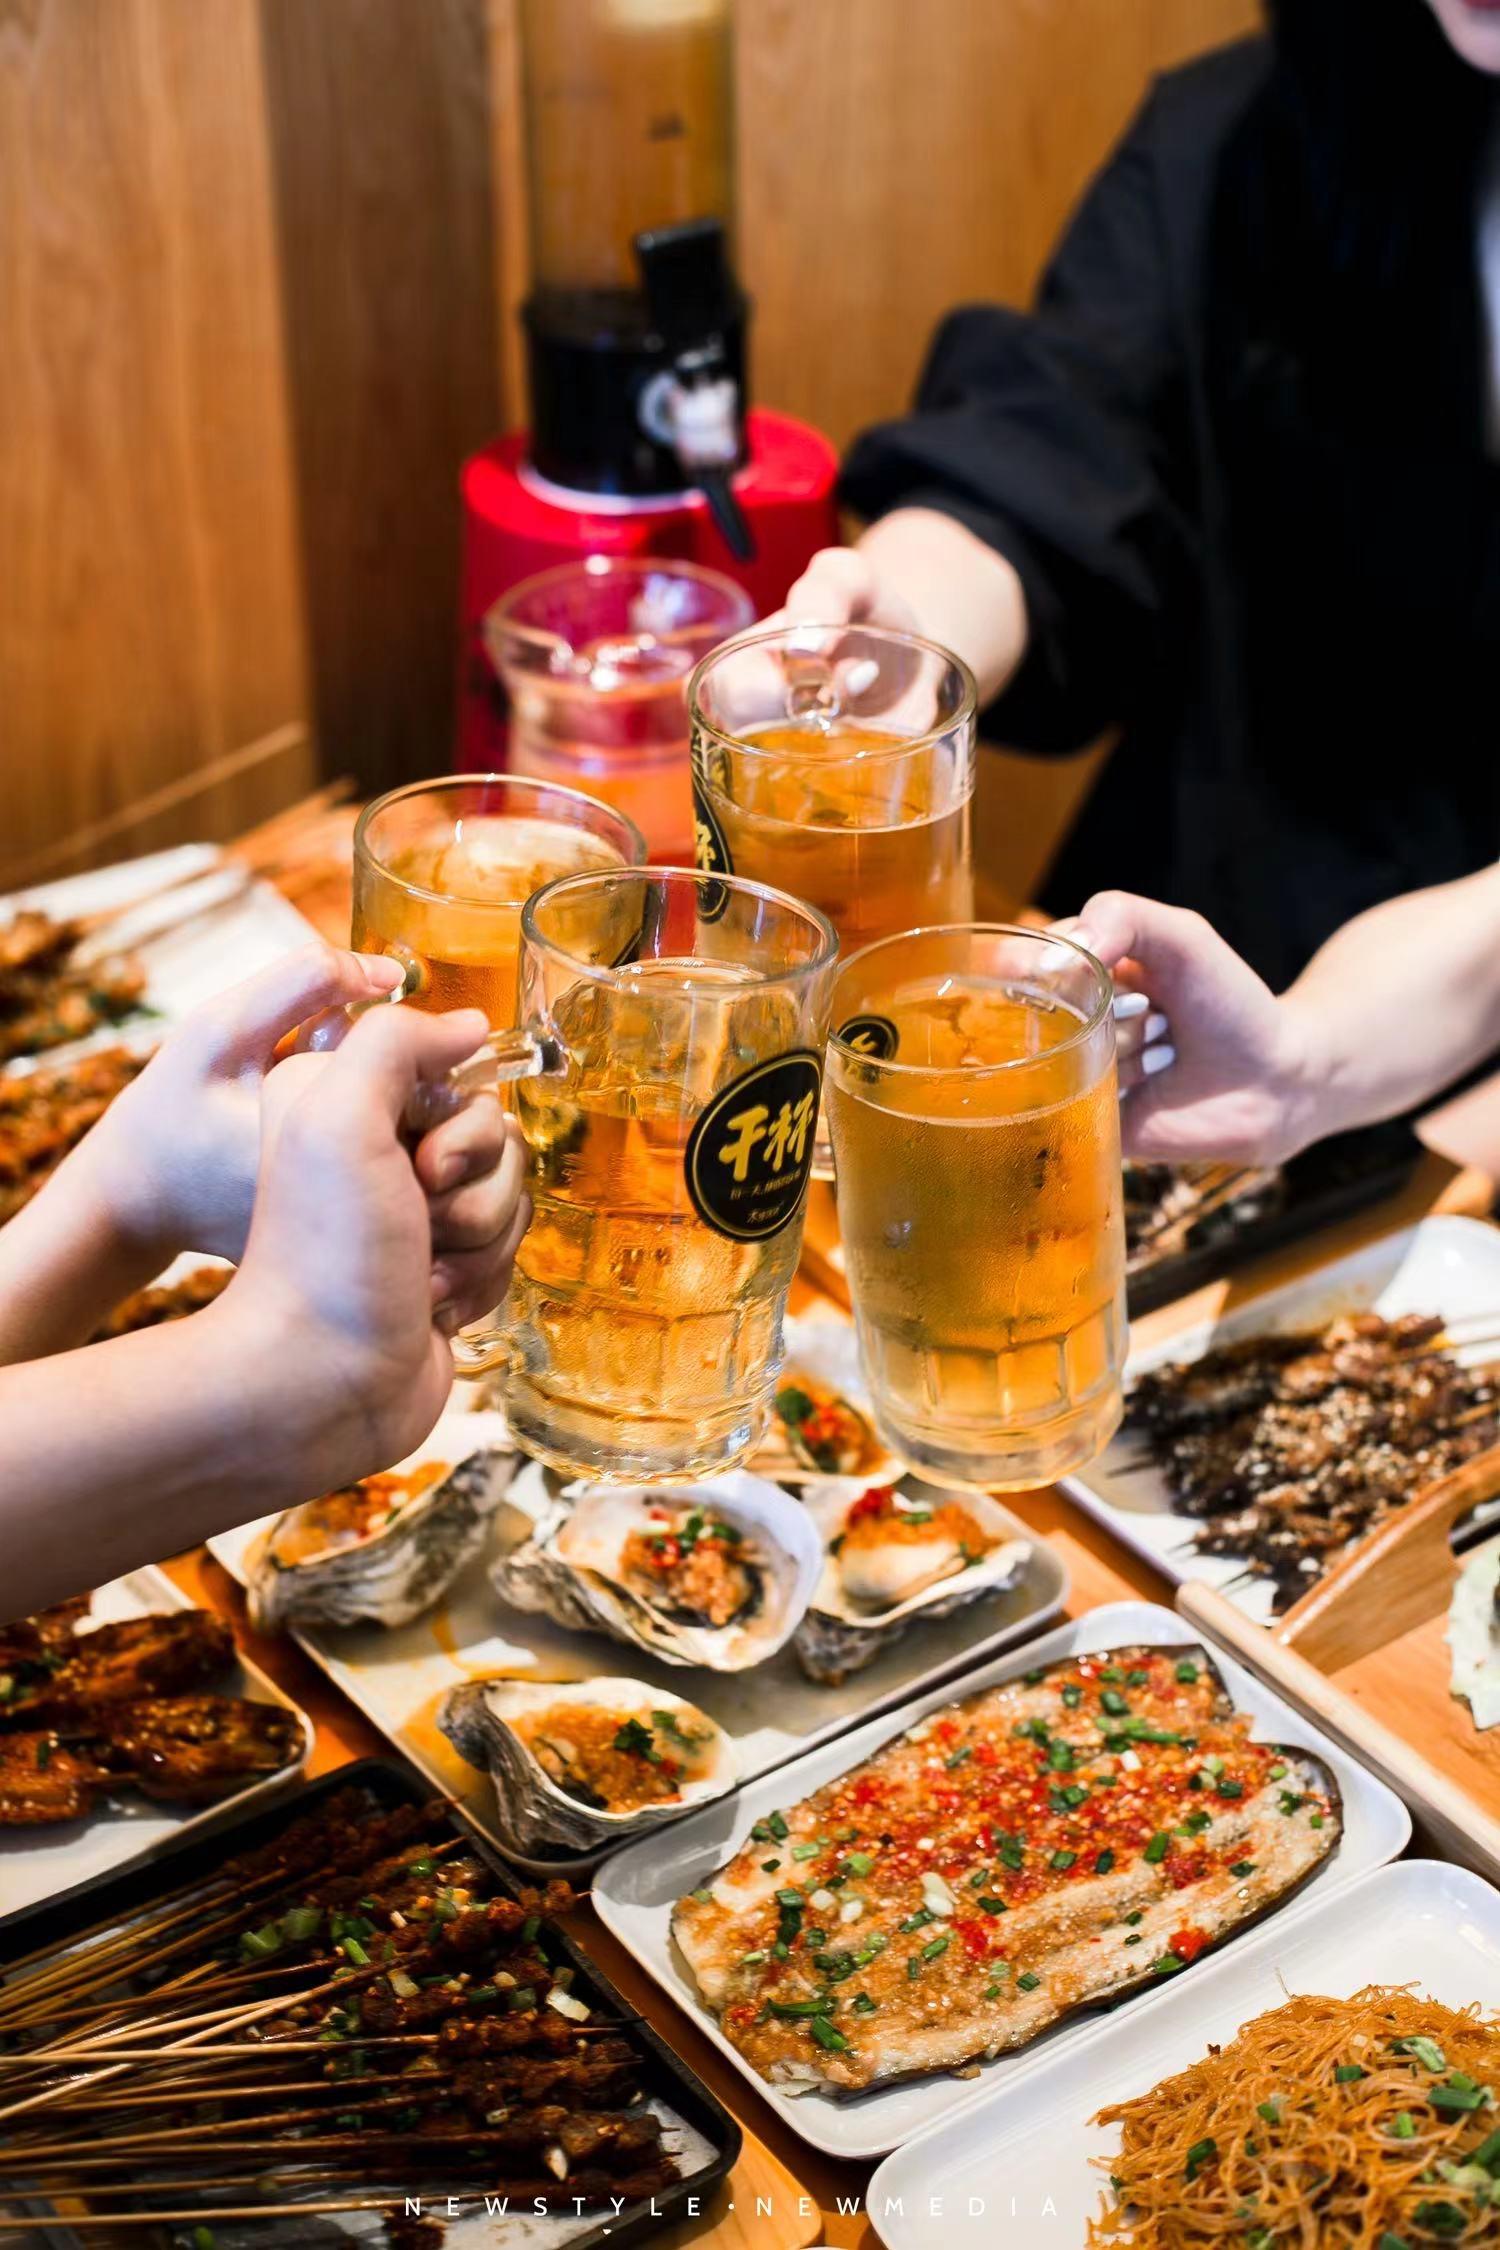 Invest Hong Kong announced today (April 9) that its client, Mainland barbecue chain Muwu BBQ, will officially open its debut store in Mongkok next Monday (April 15) and is planning to open a second one in Western district next month, as part of a global expansion. Photo shows samples of Muwu BBQ's barbecue, skewers and craft beer. 

